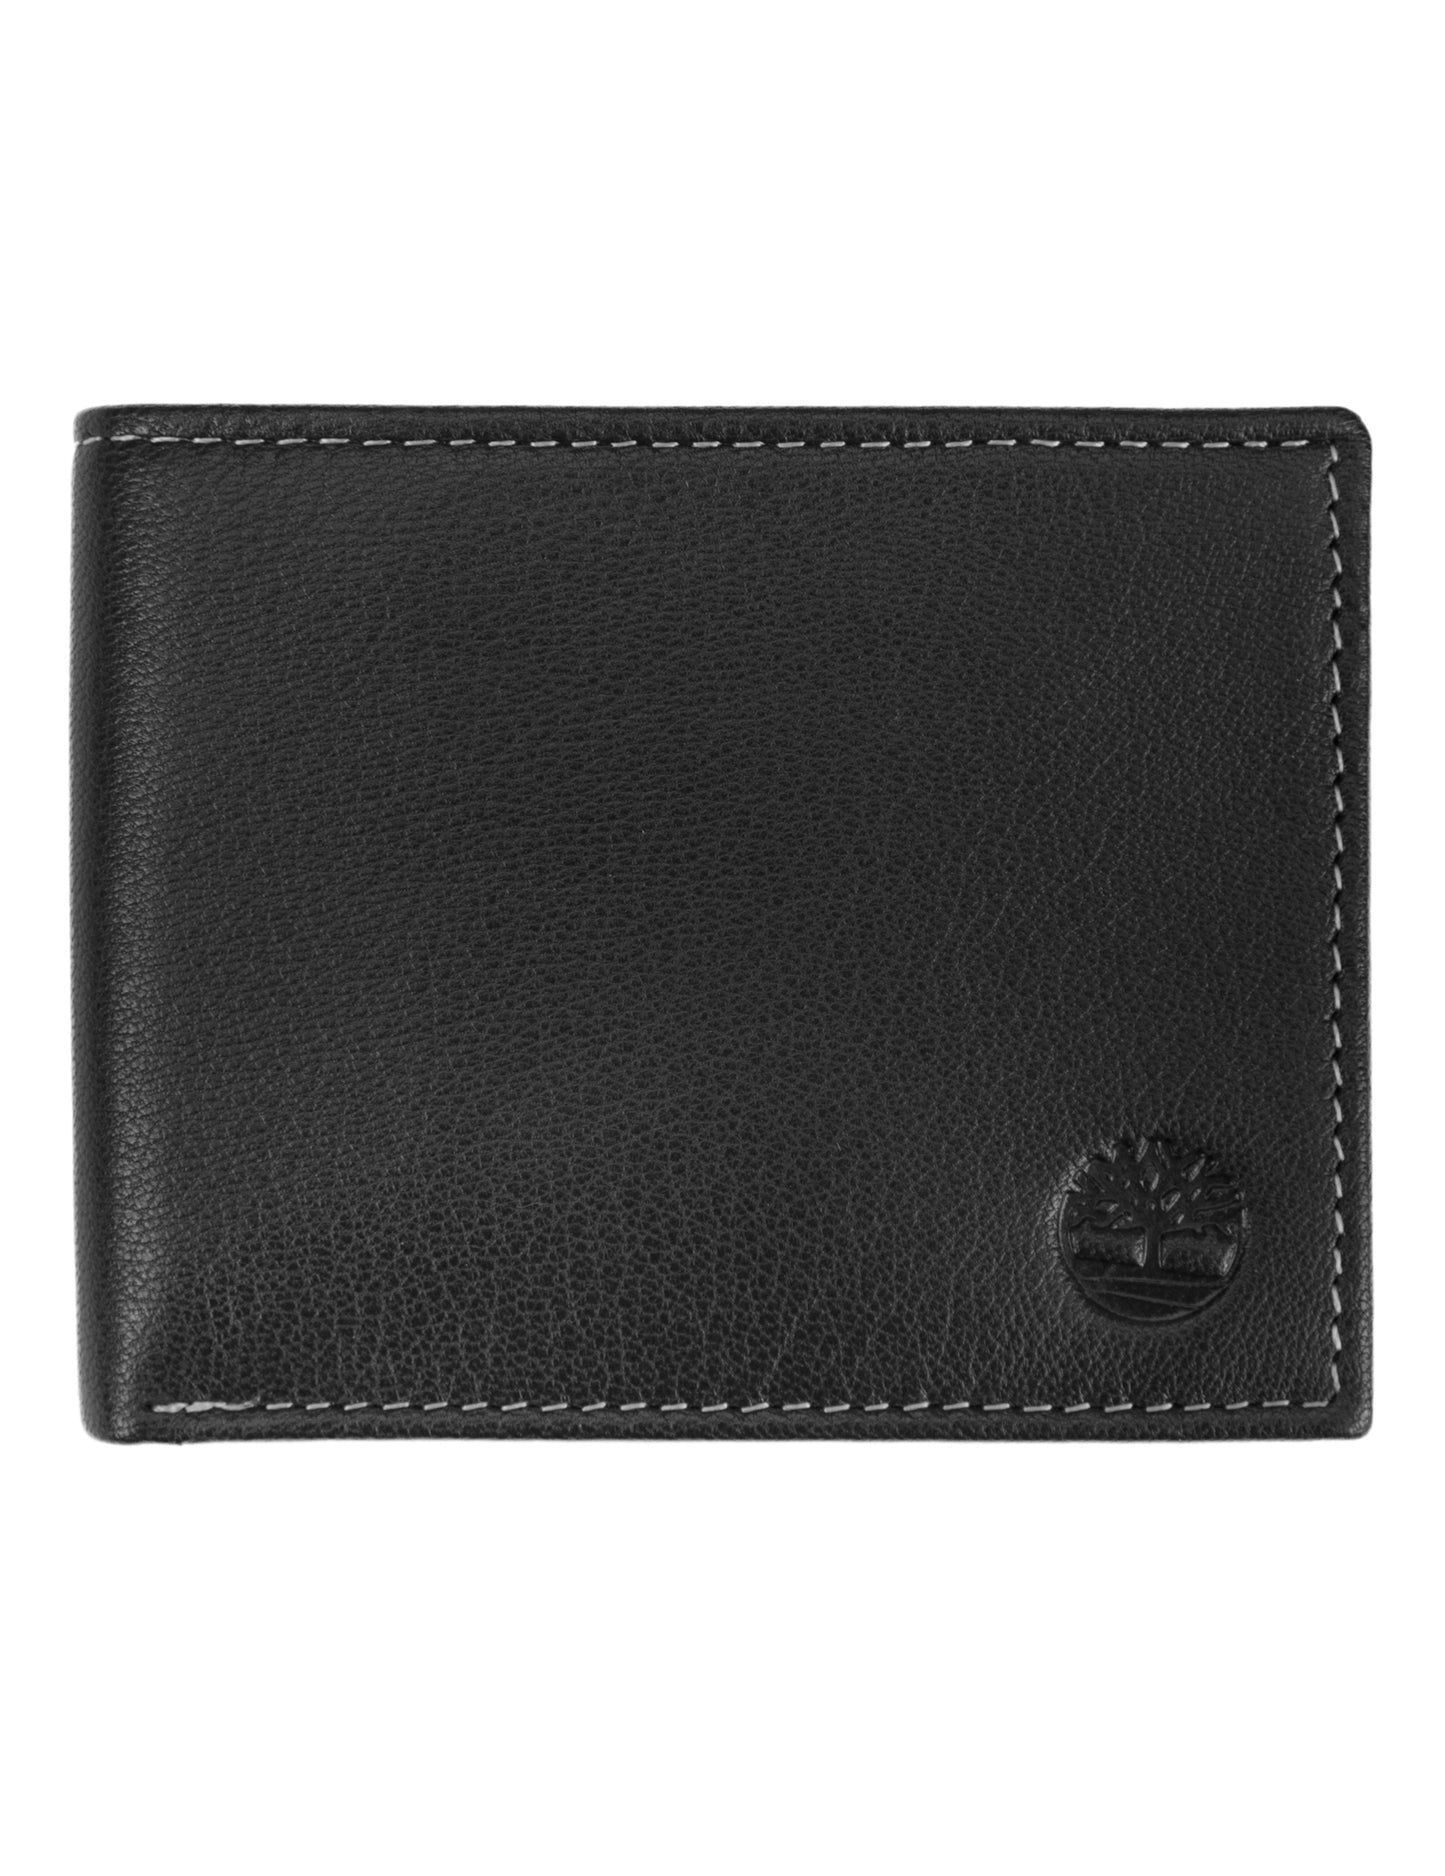 Black timberland leather wallet with contrast stitching 5 card slots, 2 slip pockets, 1 clear ID slot, and 1 cash compartment